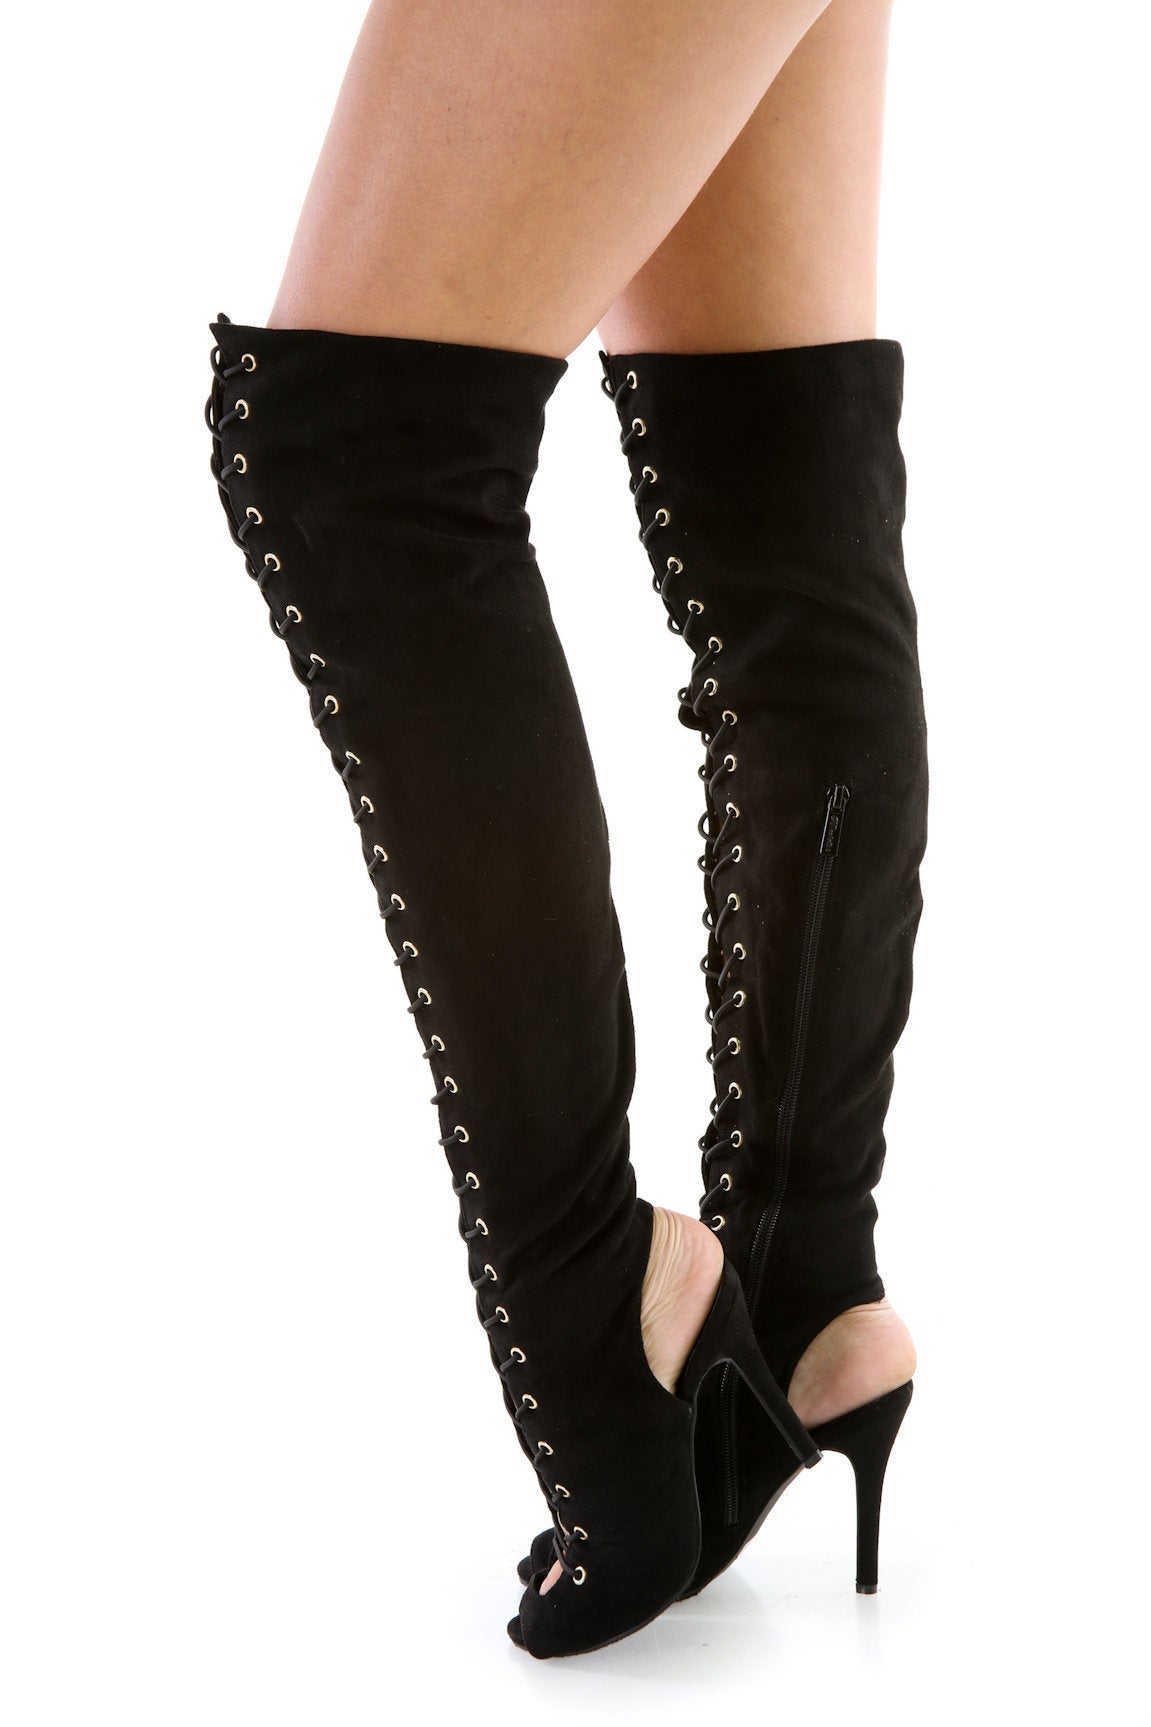 Lace Up Thigh High Boots